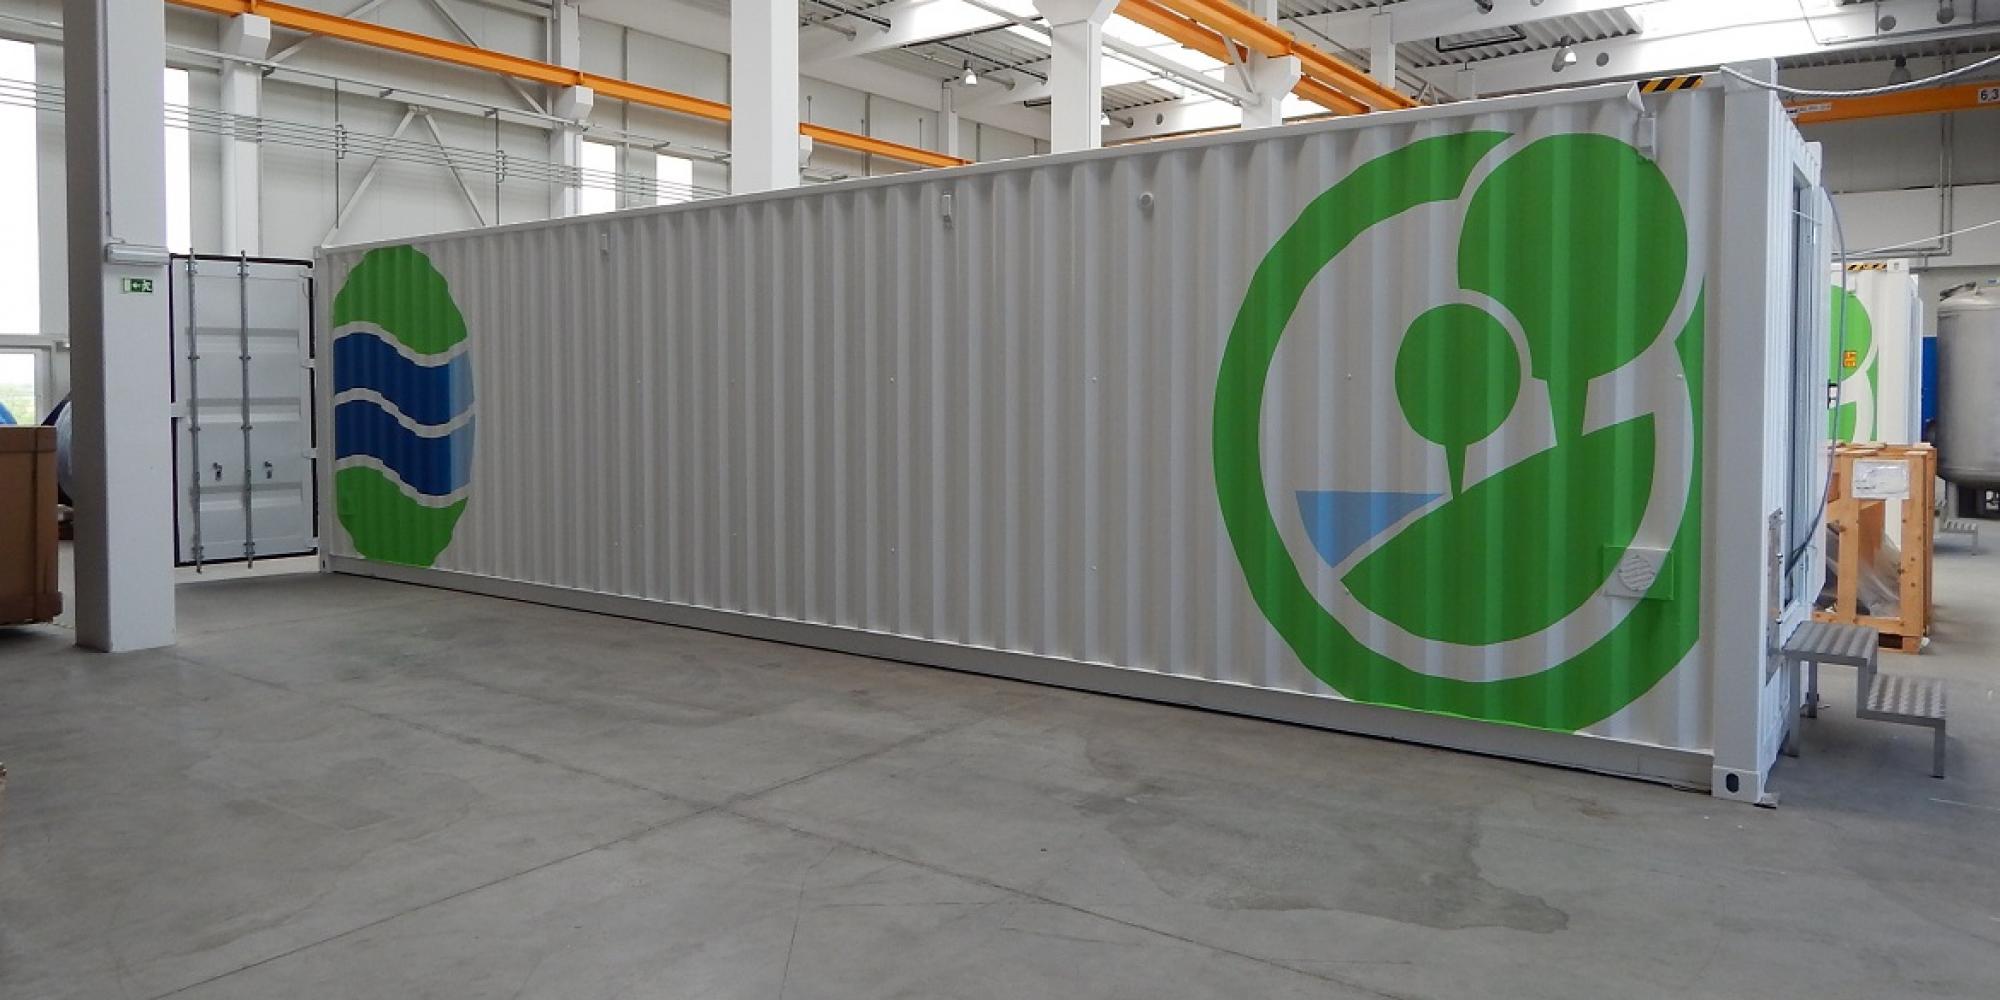 Treatment of landfill leachate with a mobile, containerised treatment plant in Hungary